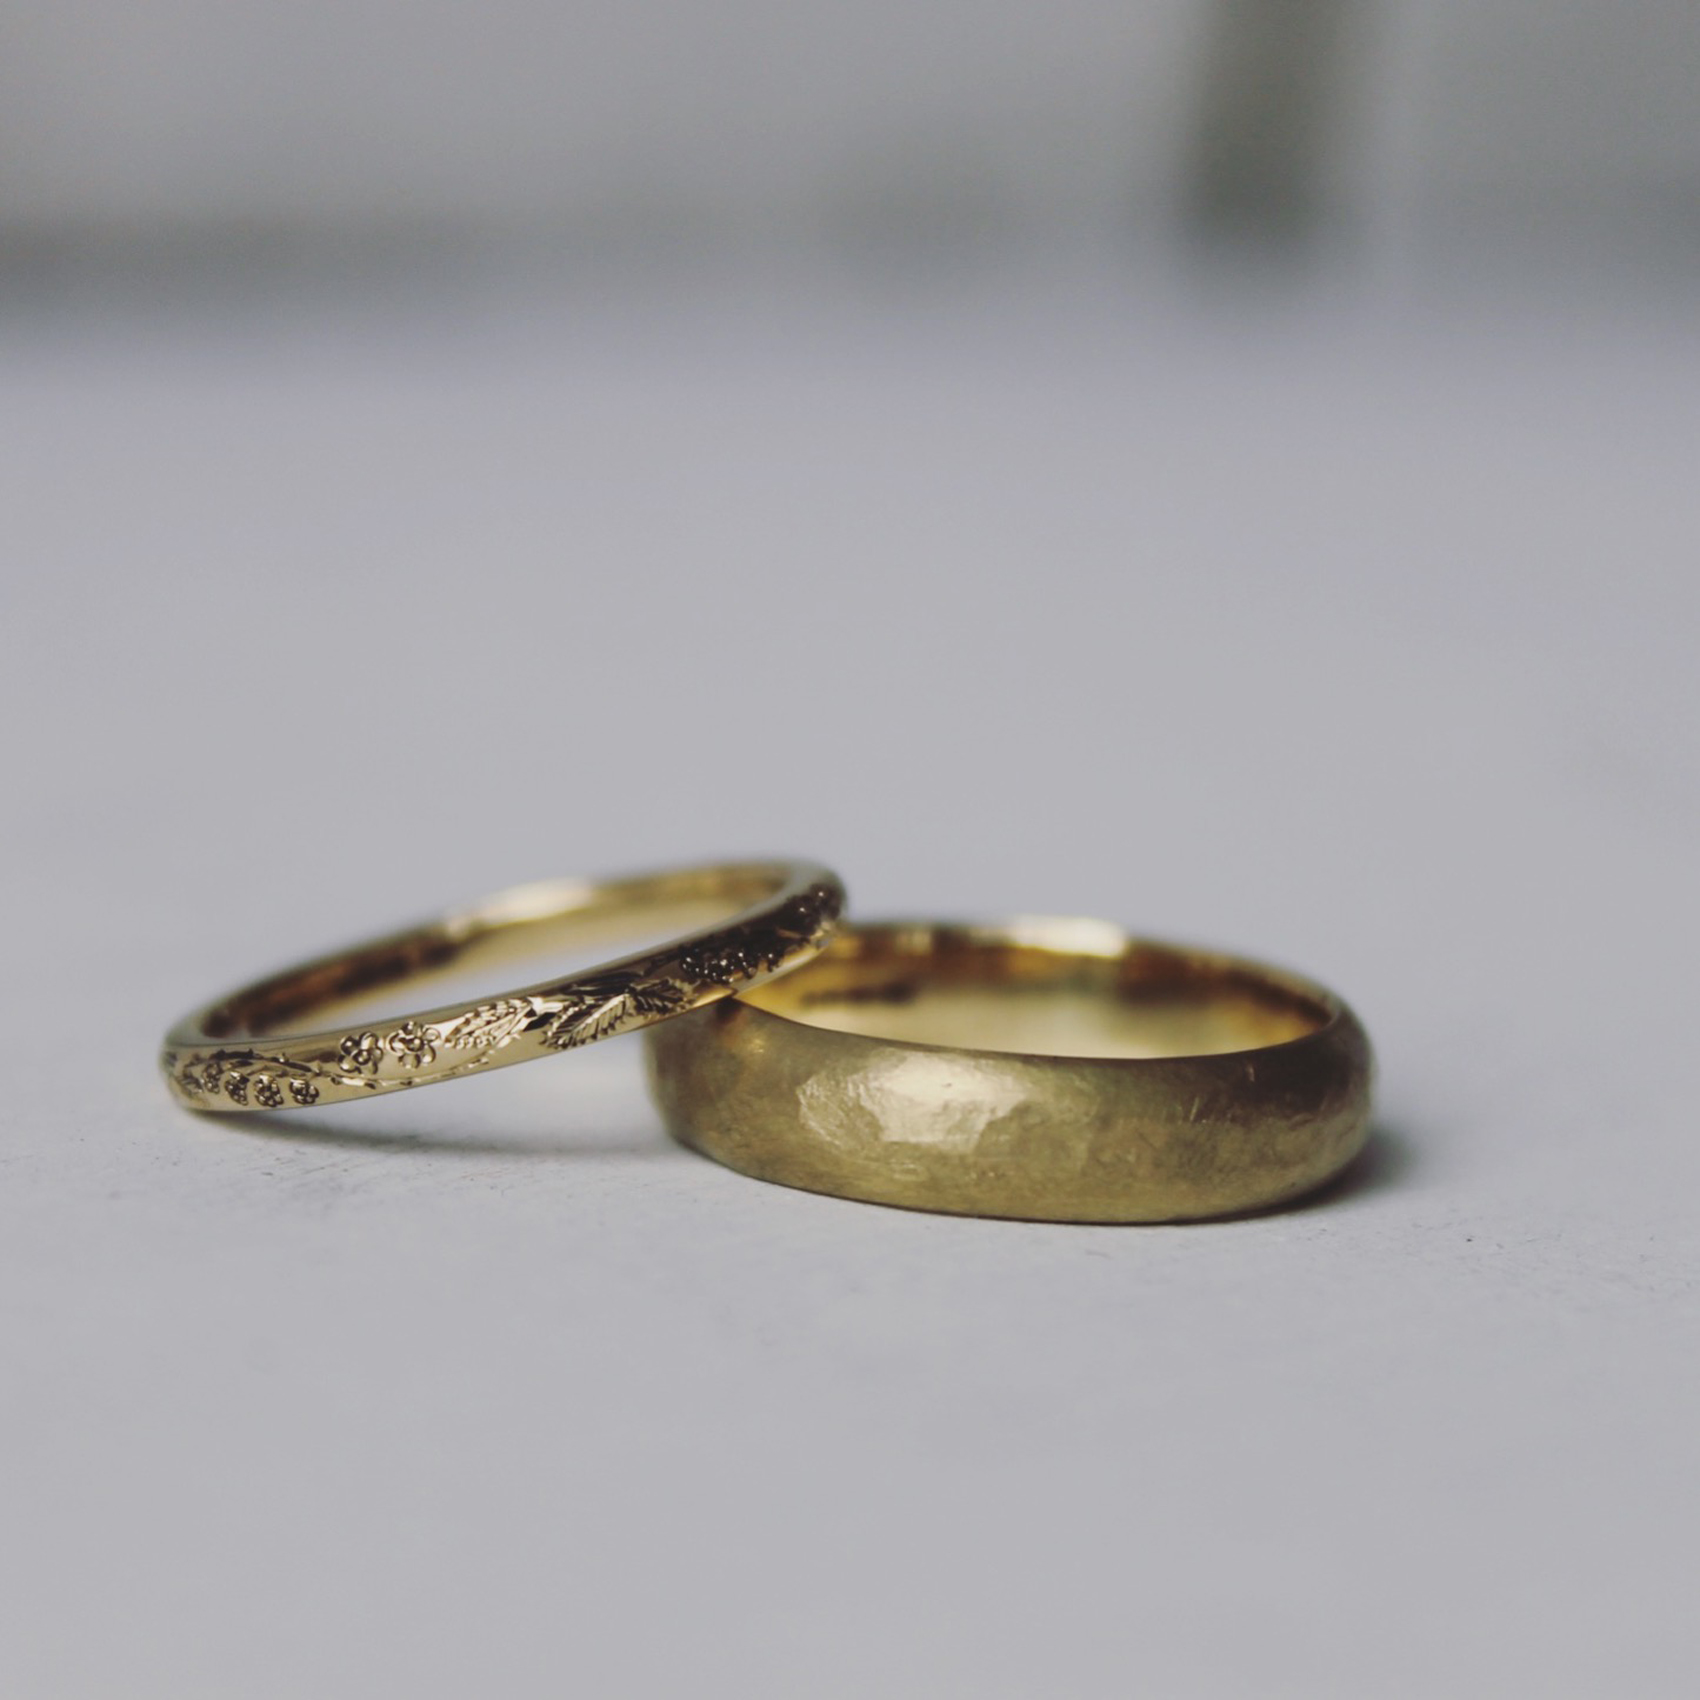 13 The Quarter Workshop make your own wedding engagement rings